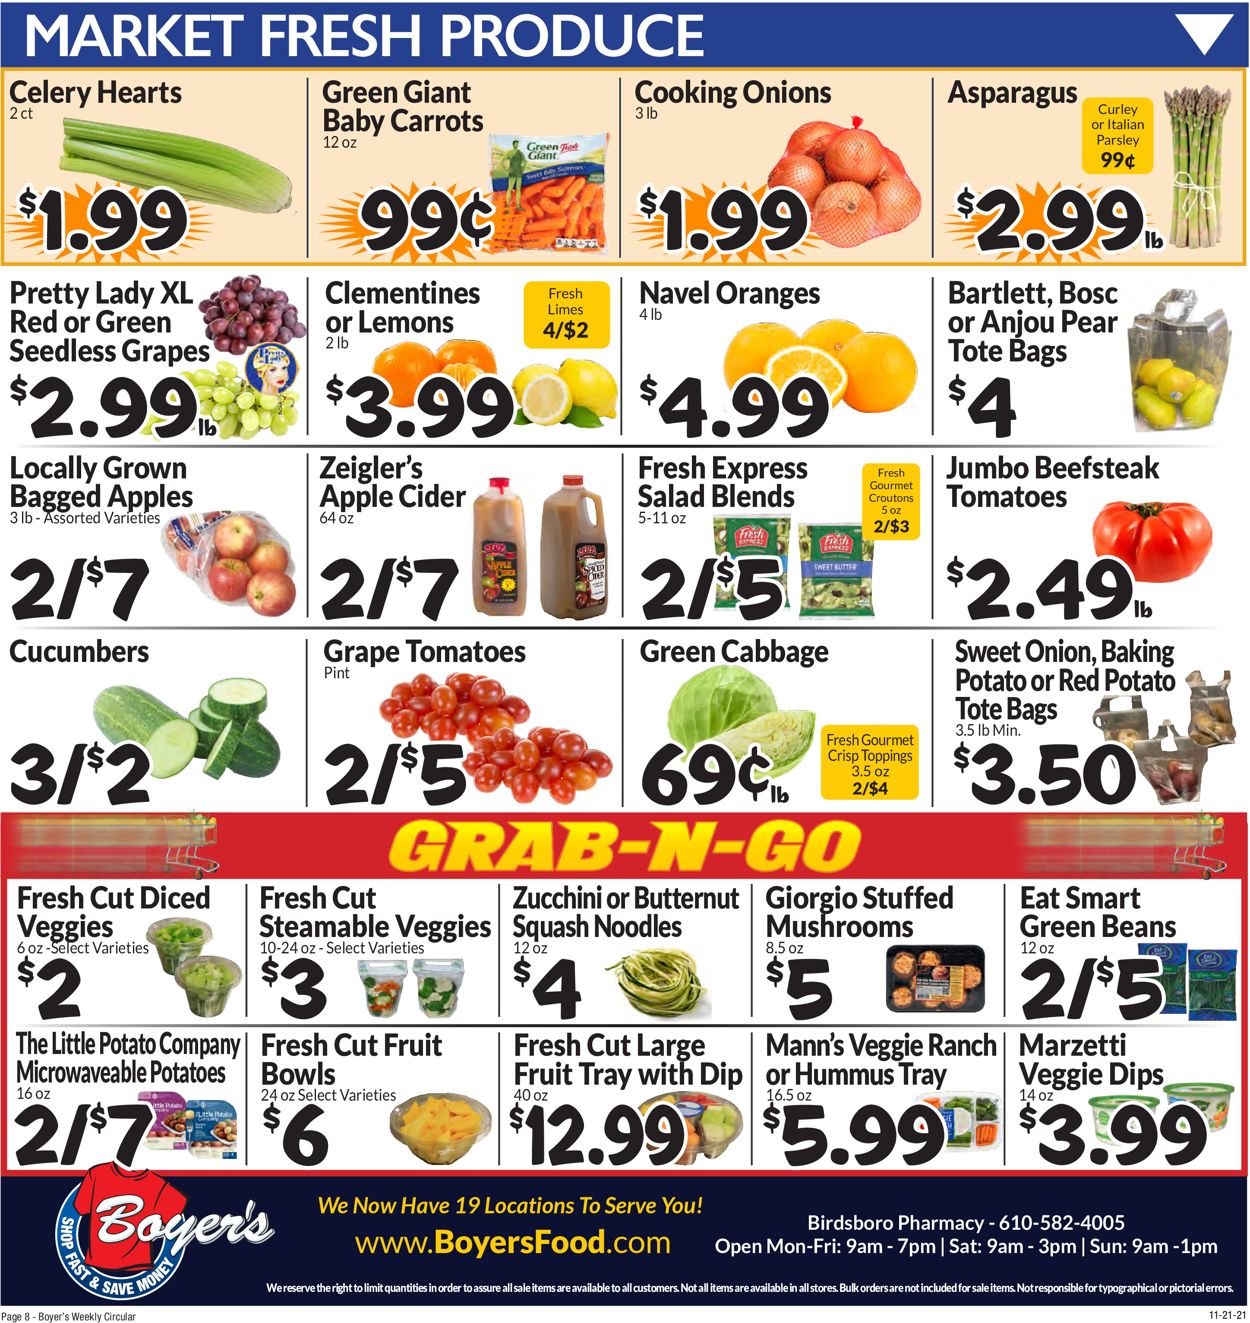 Boyer's Food Markets THANKSGIVING 2021 Weekly Ad Circular - valid 11/21-11/27/2021 (Page 11)